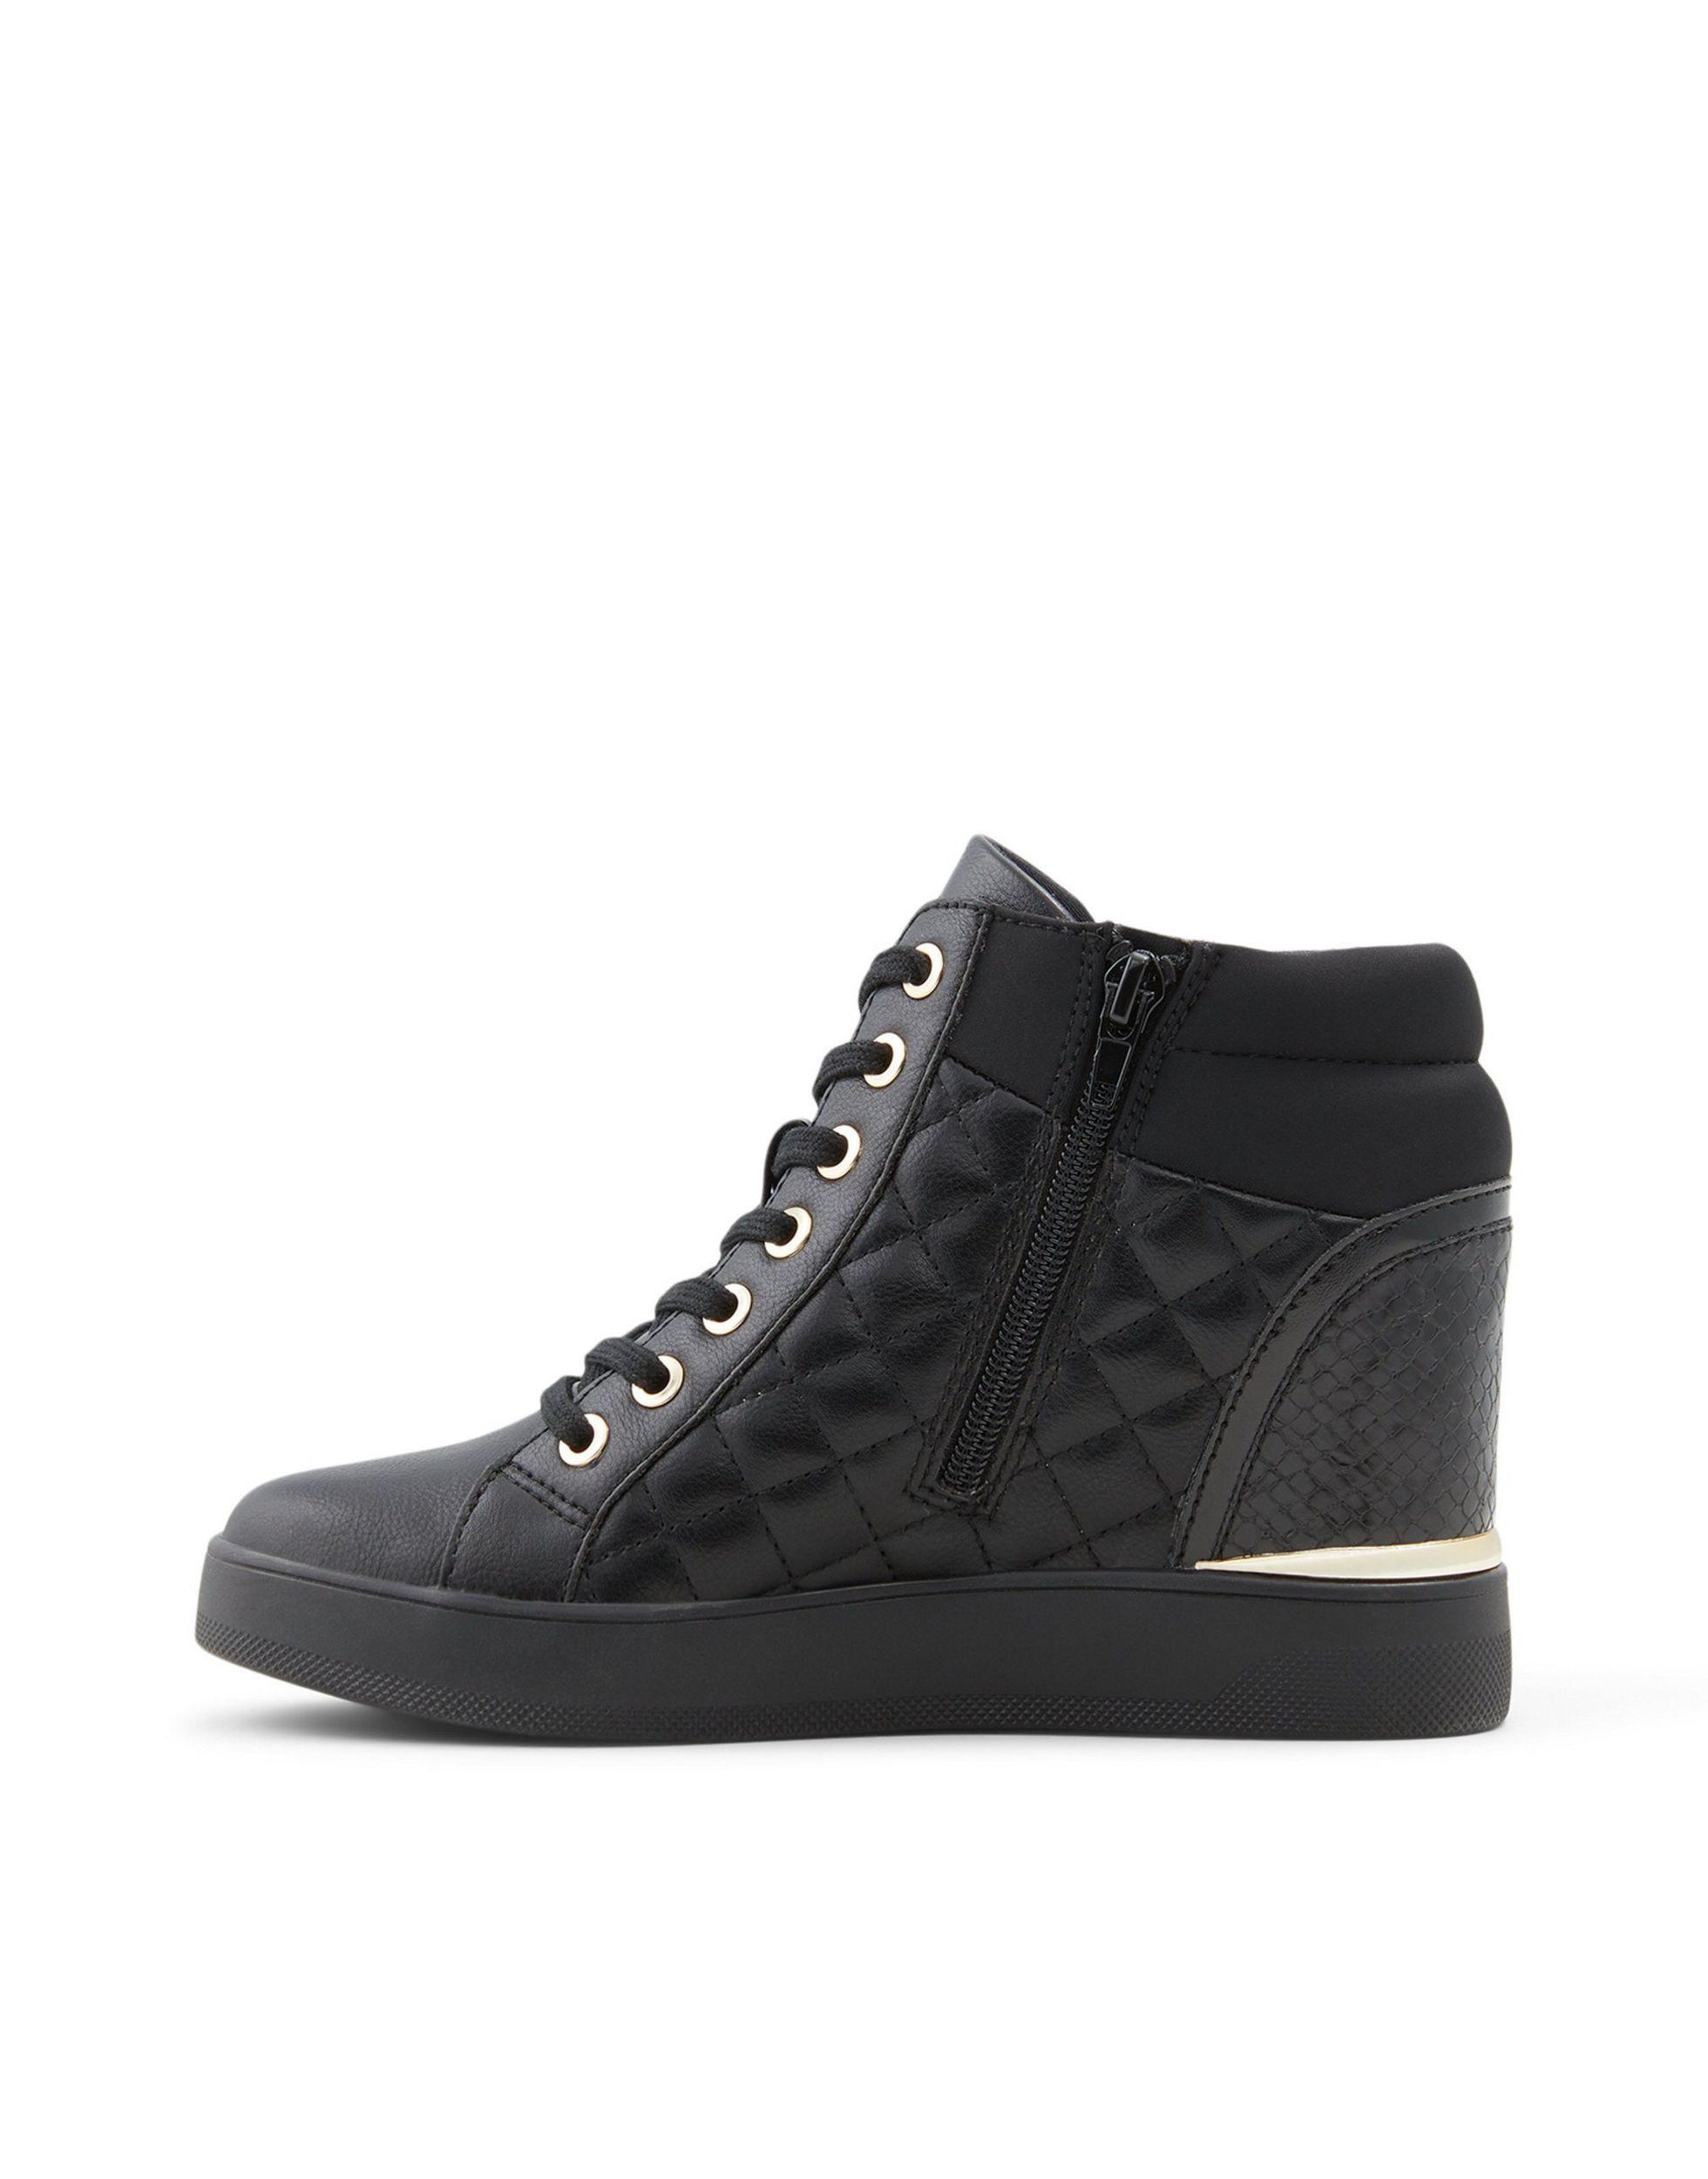 ALDO Ailanna Wedge Sneakers With Faux Fur Lining in Black | Lyst